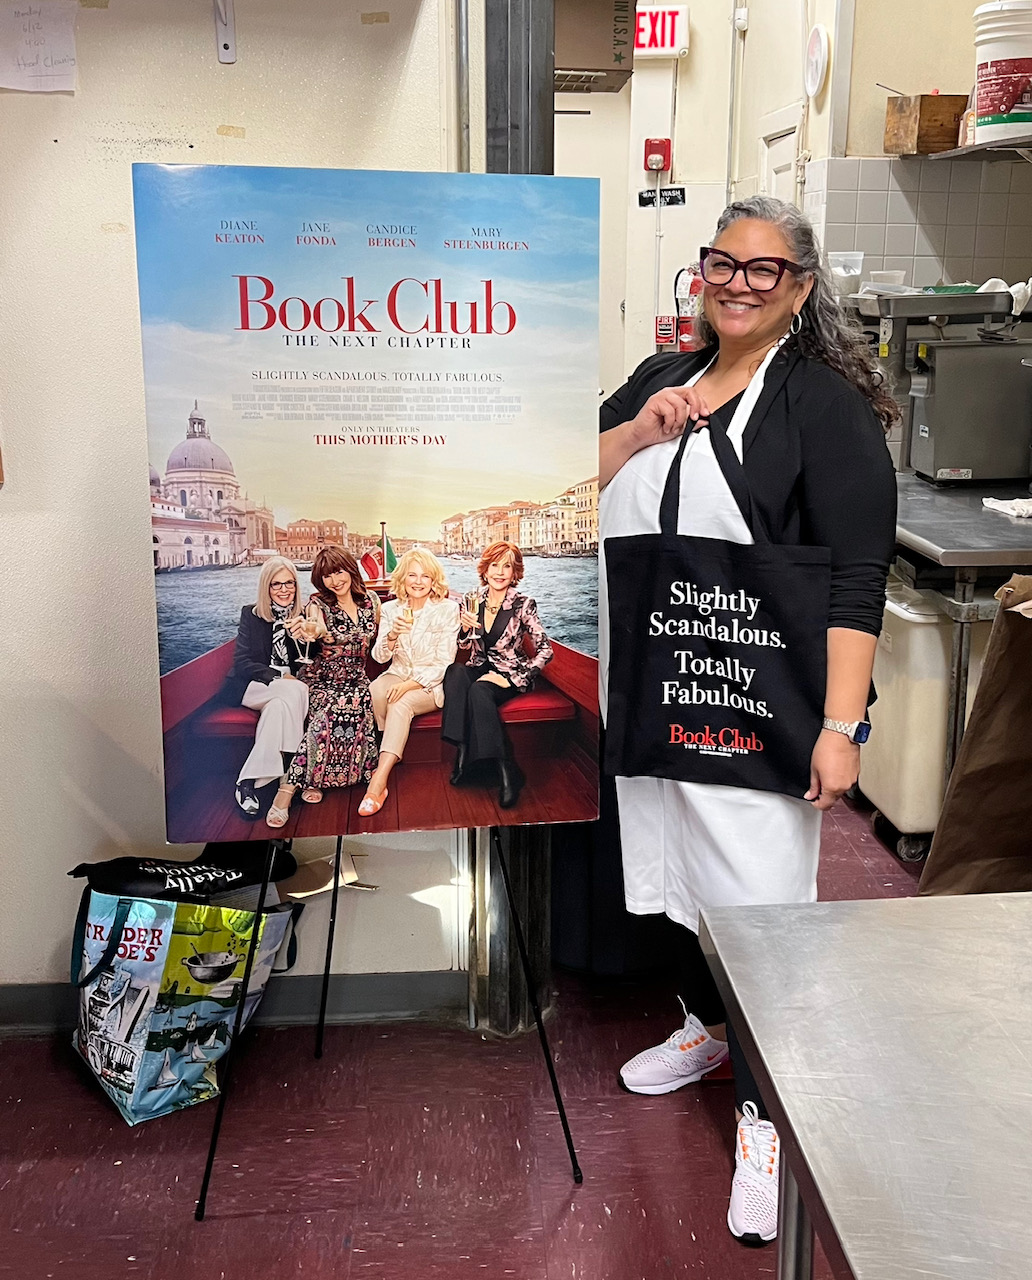 Pebbles in a restaurant kitchen next to a sign of the movie poster for Book Club - The Next Chapter. Also holding a bag that reads "Slightly scandalous. Totally Fabulous"